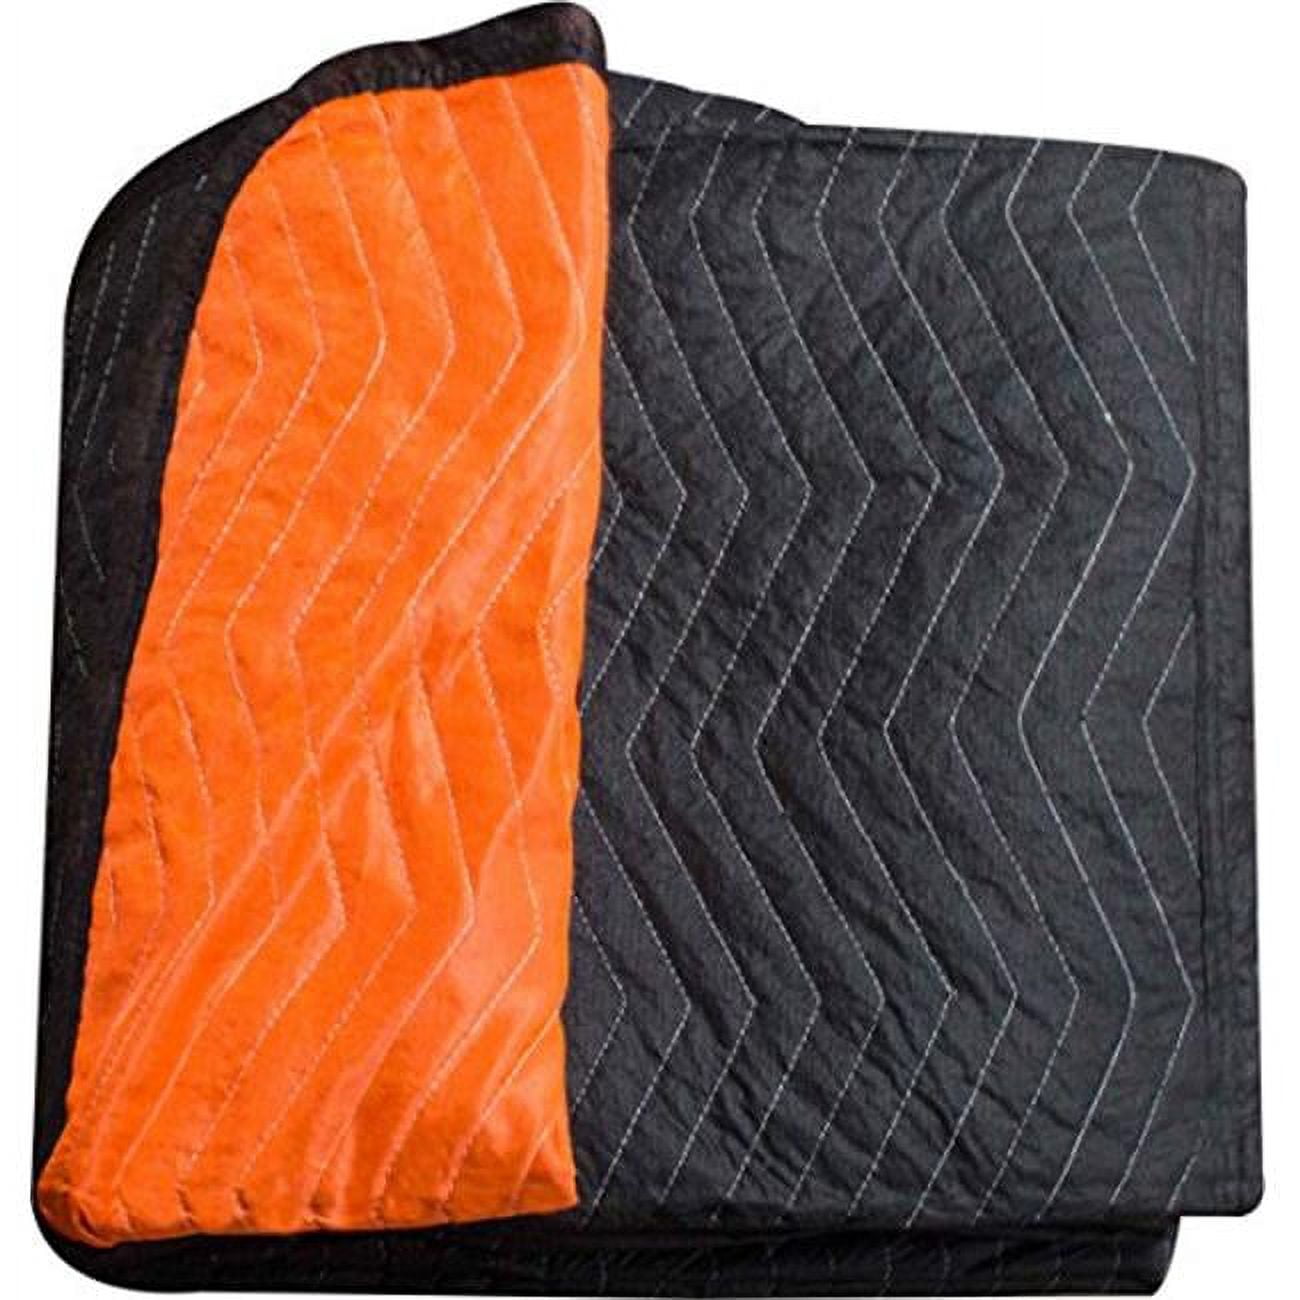 UPC 811938000013 product image for Above All FFBMB-R Burly Heavy Weight Moving Blanket - 72 x 80 in. | upcitemdb.com